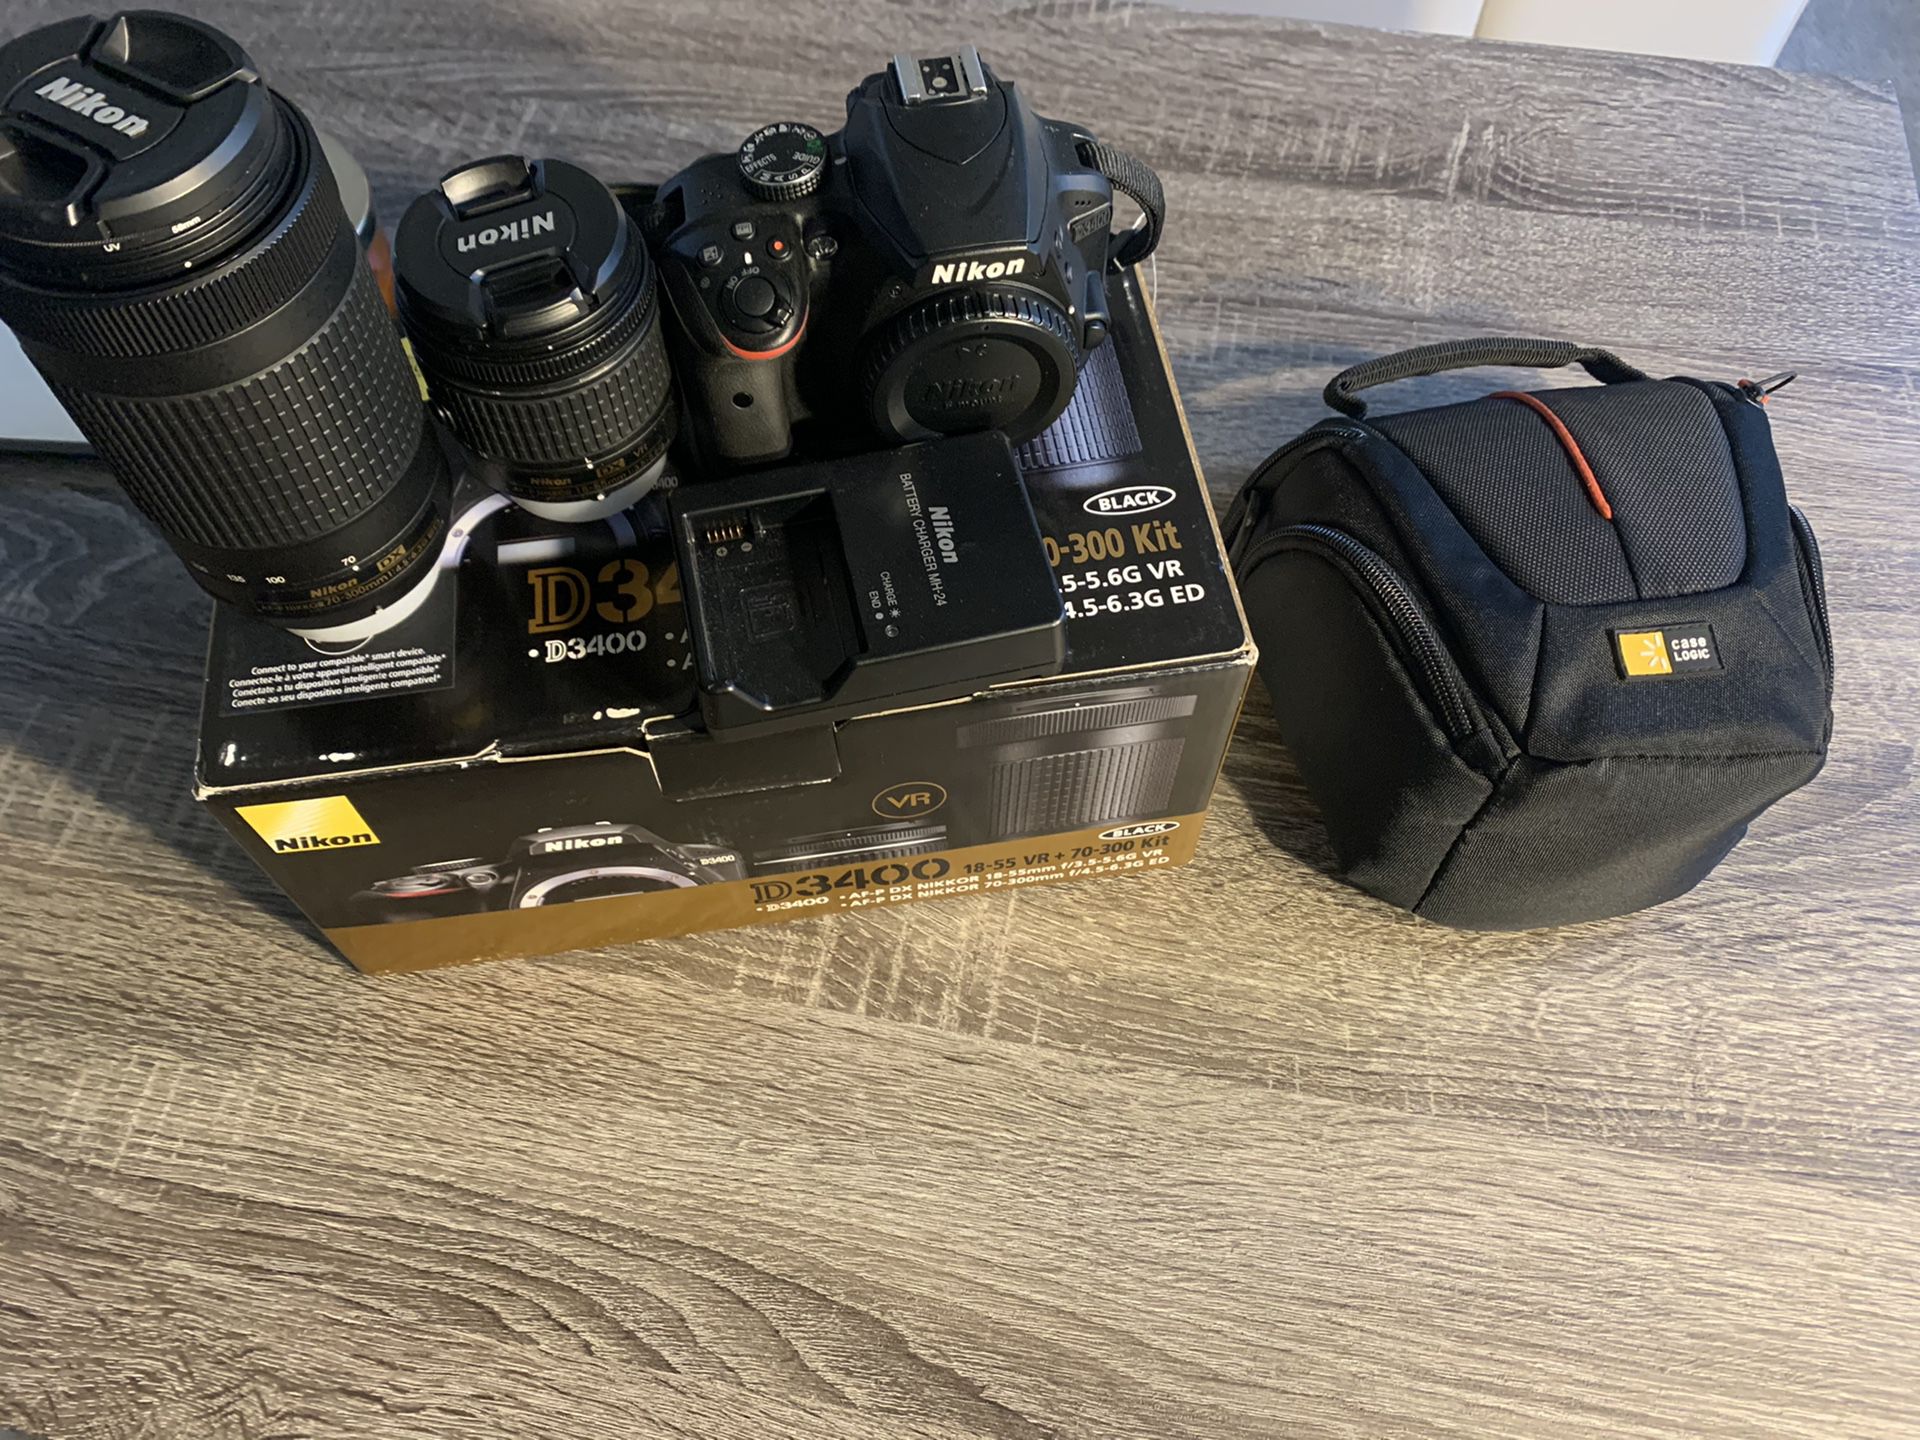 Nikon D3400 with two lenses and case